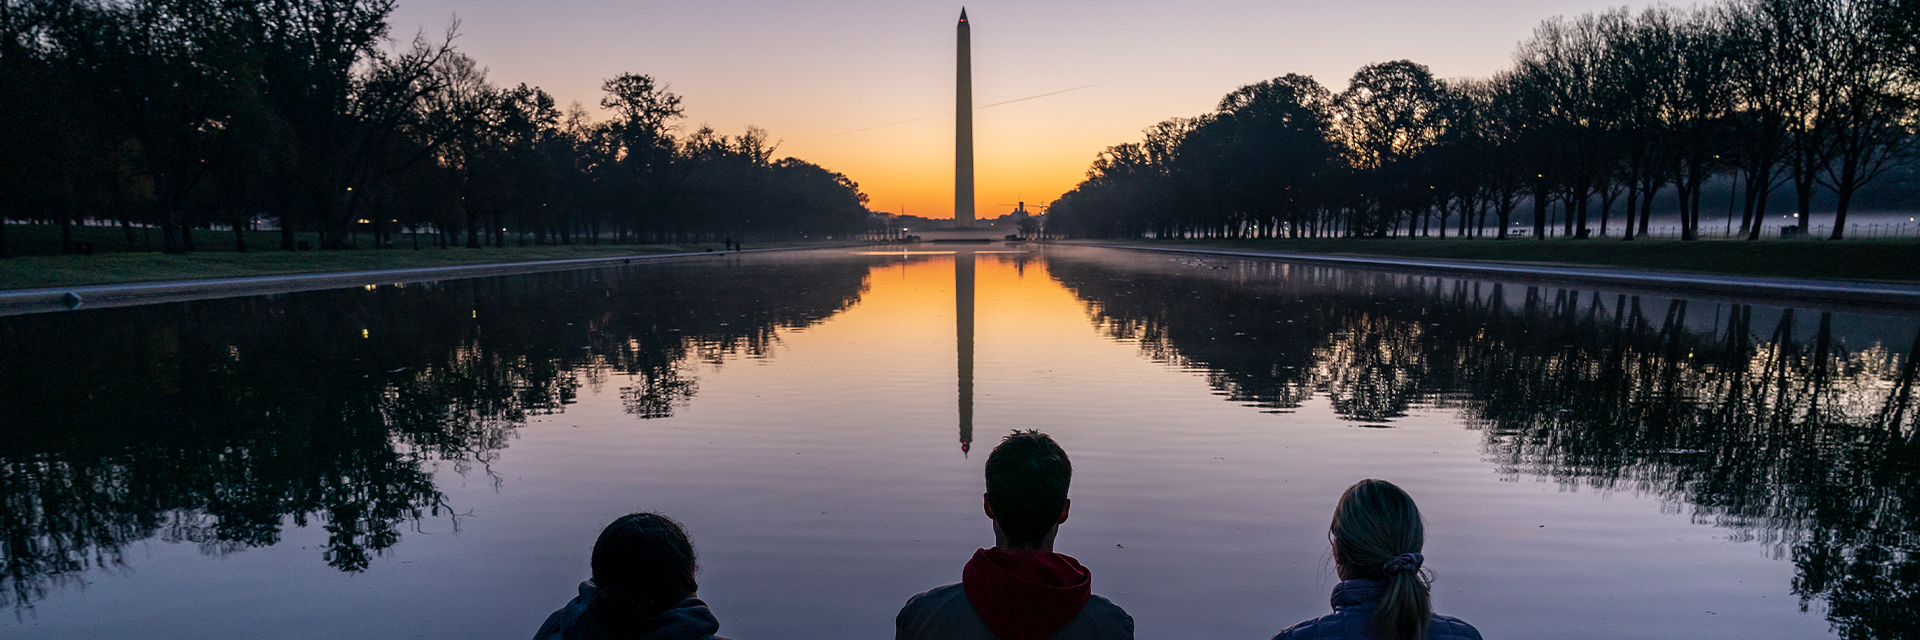 Washington Monument with three people in foreground